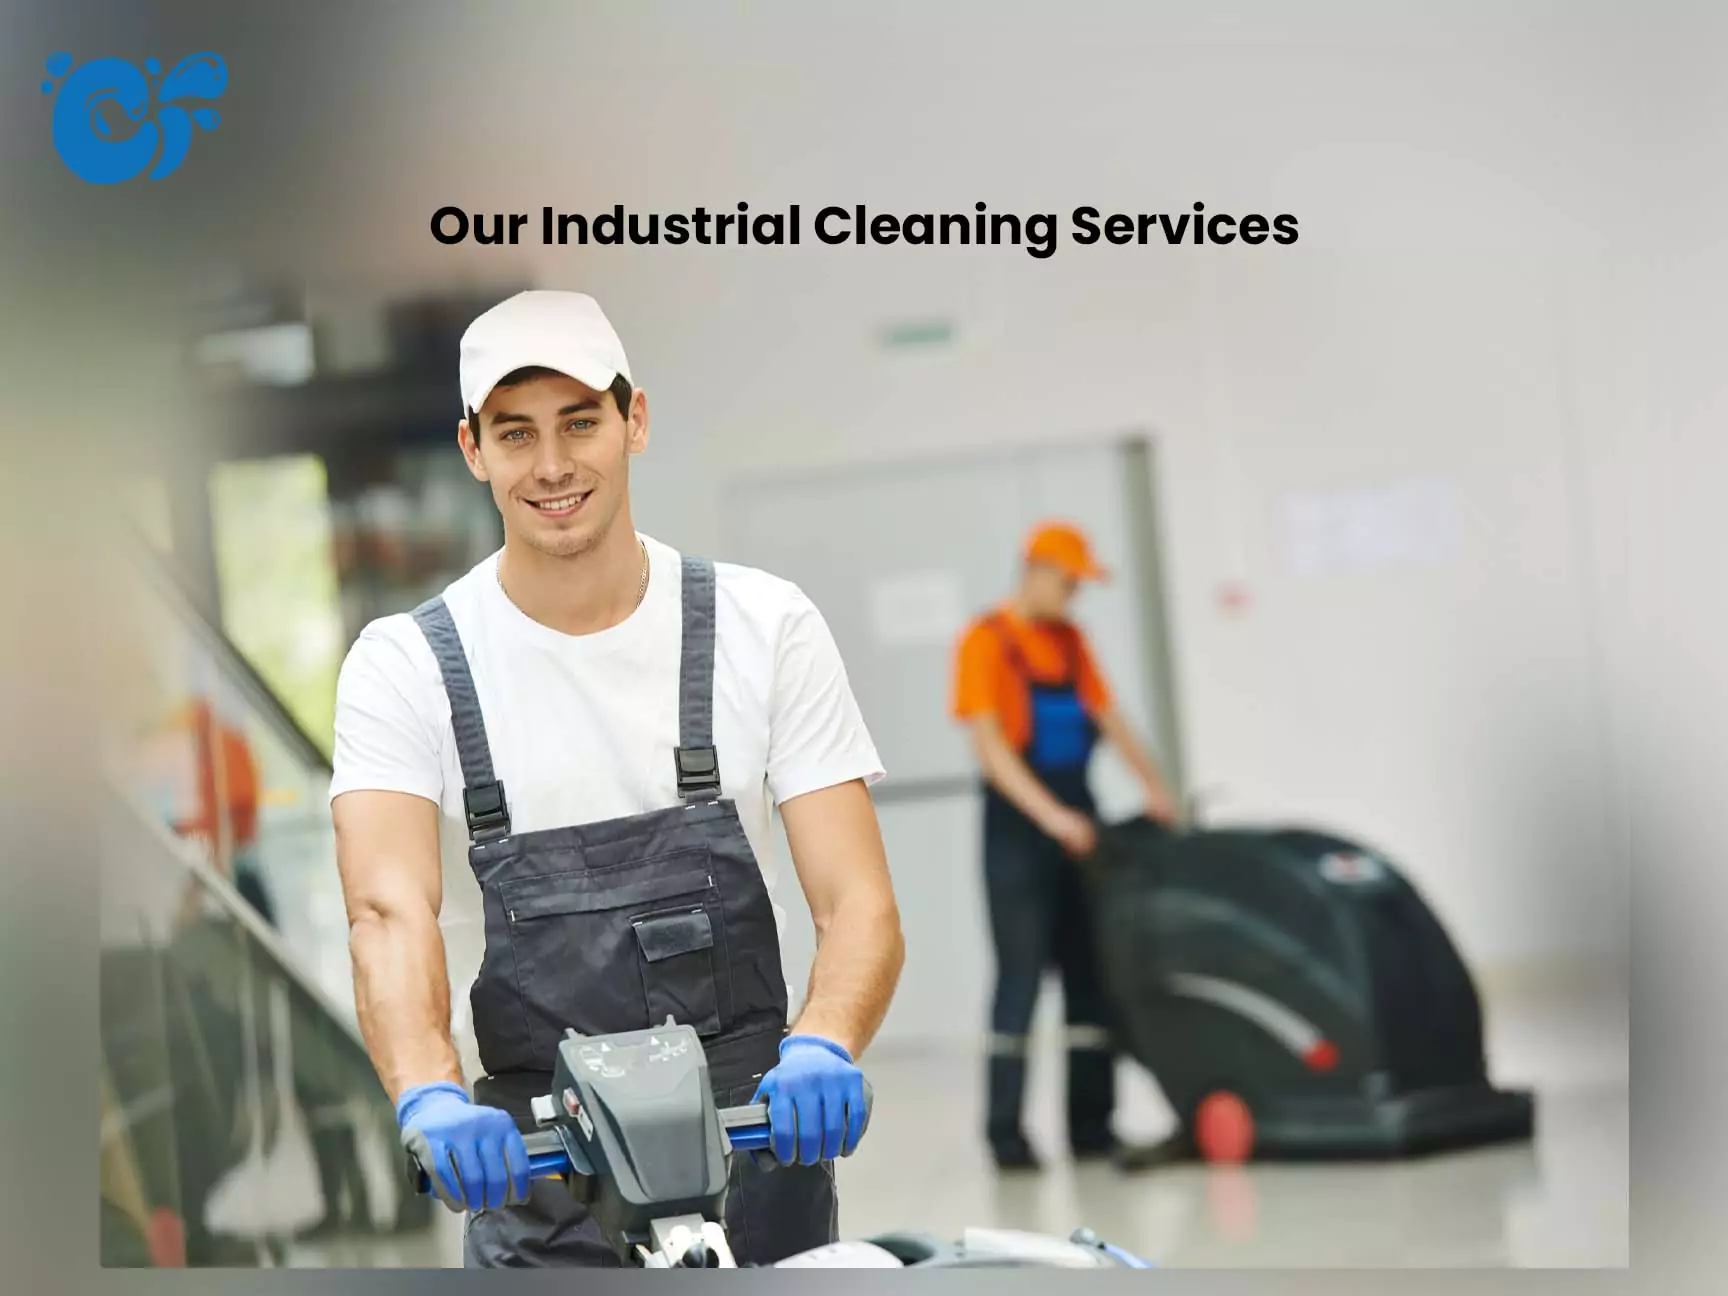 Our Industrial Cleaning Services